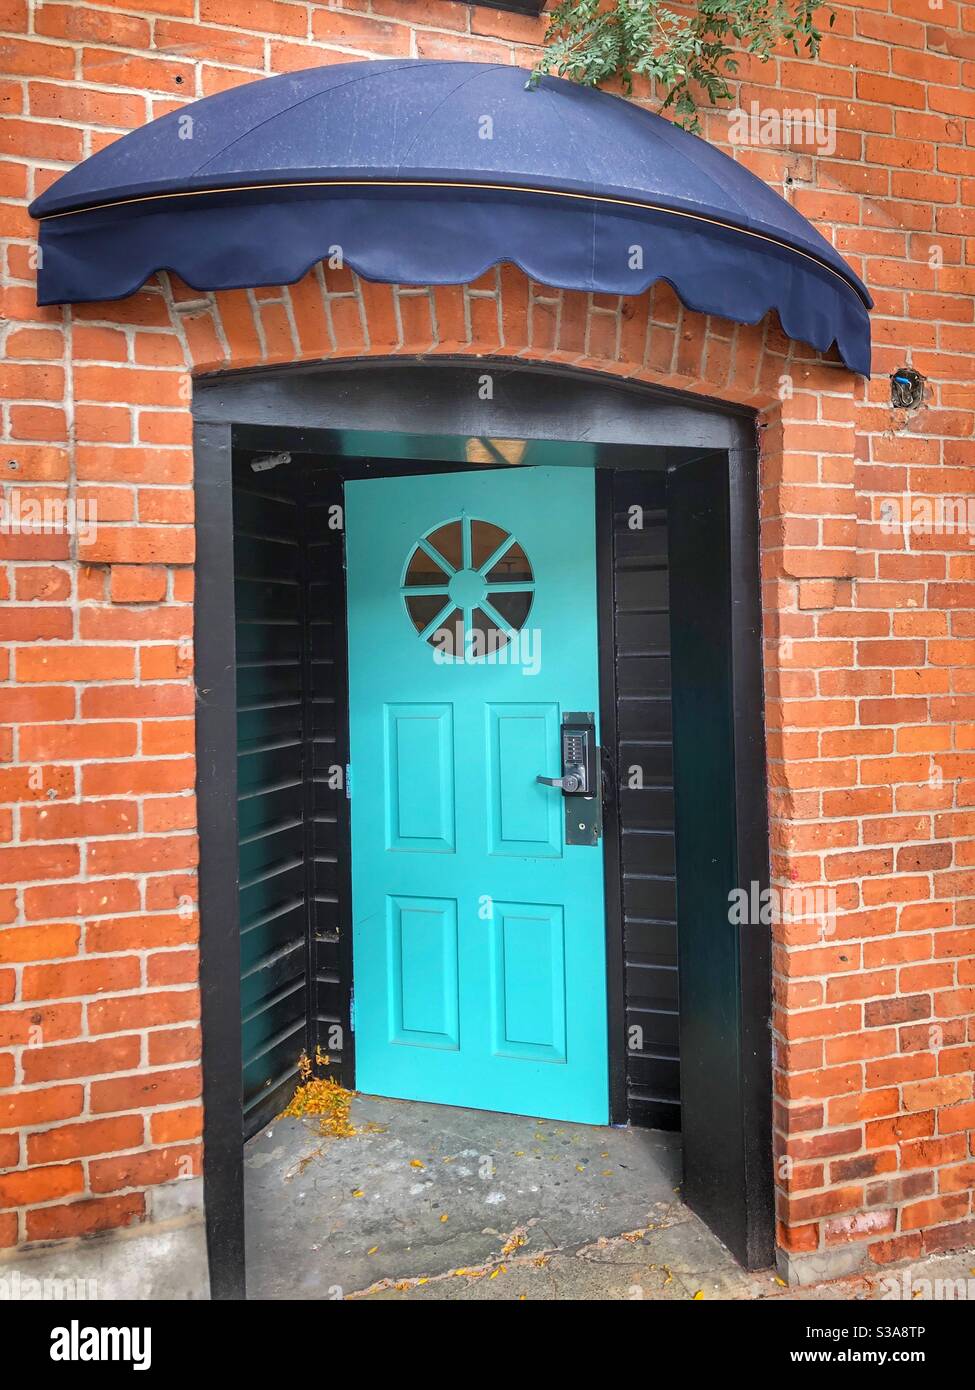 A bright turquoise door as a stark contrast to the red brick building. Stock Photo